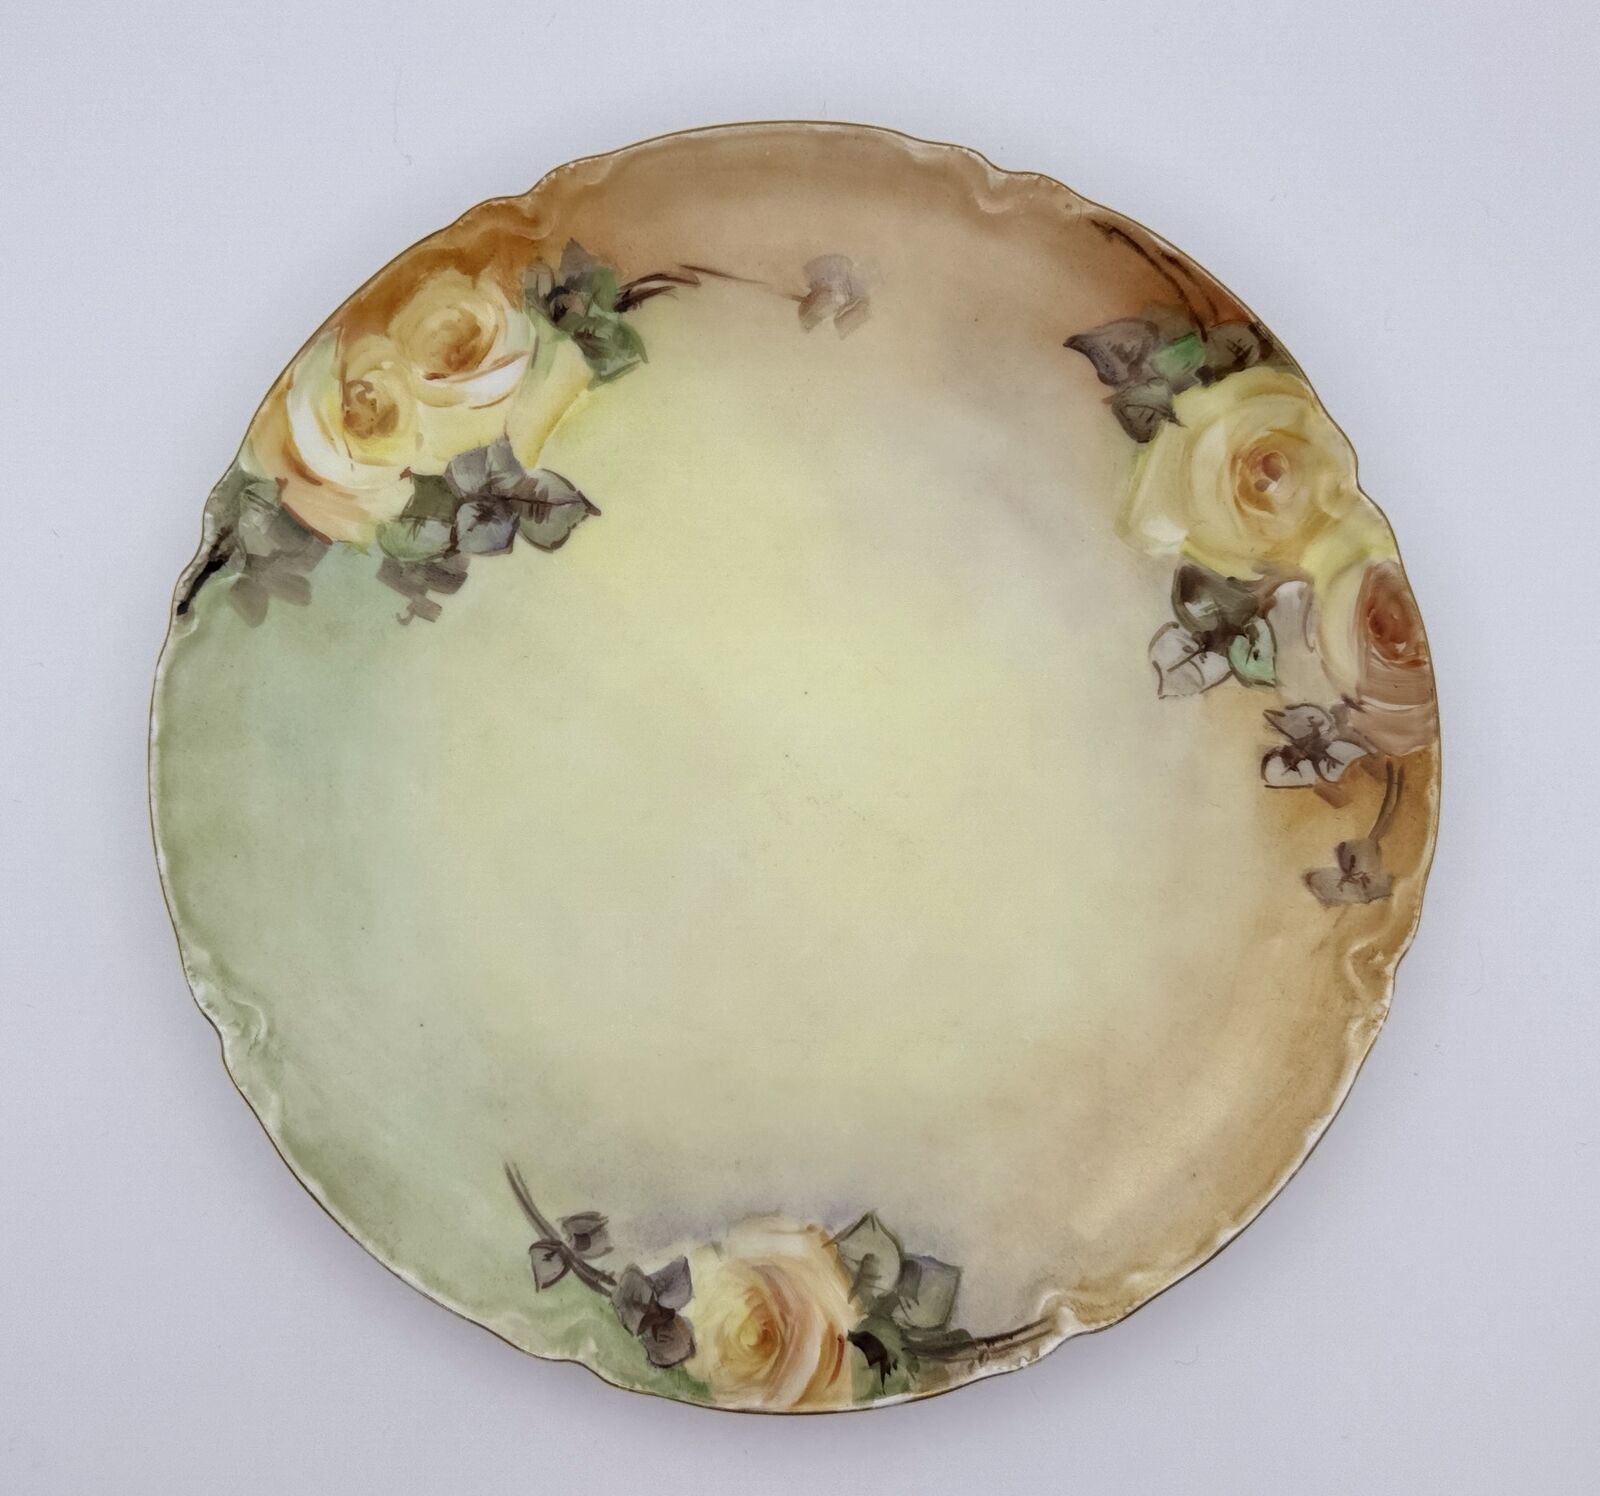 Vintage Haviland & Co. Limoges France Hand-Painted Plate with Yellow Rose Design